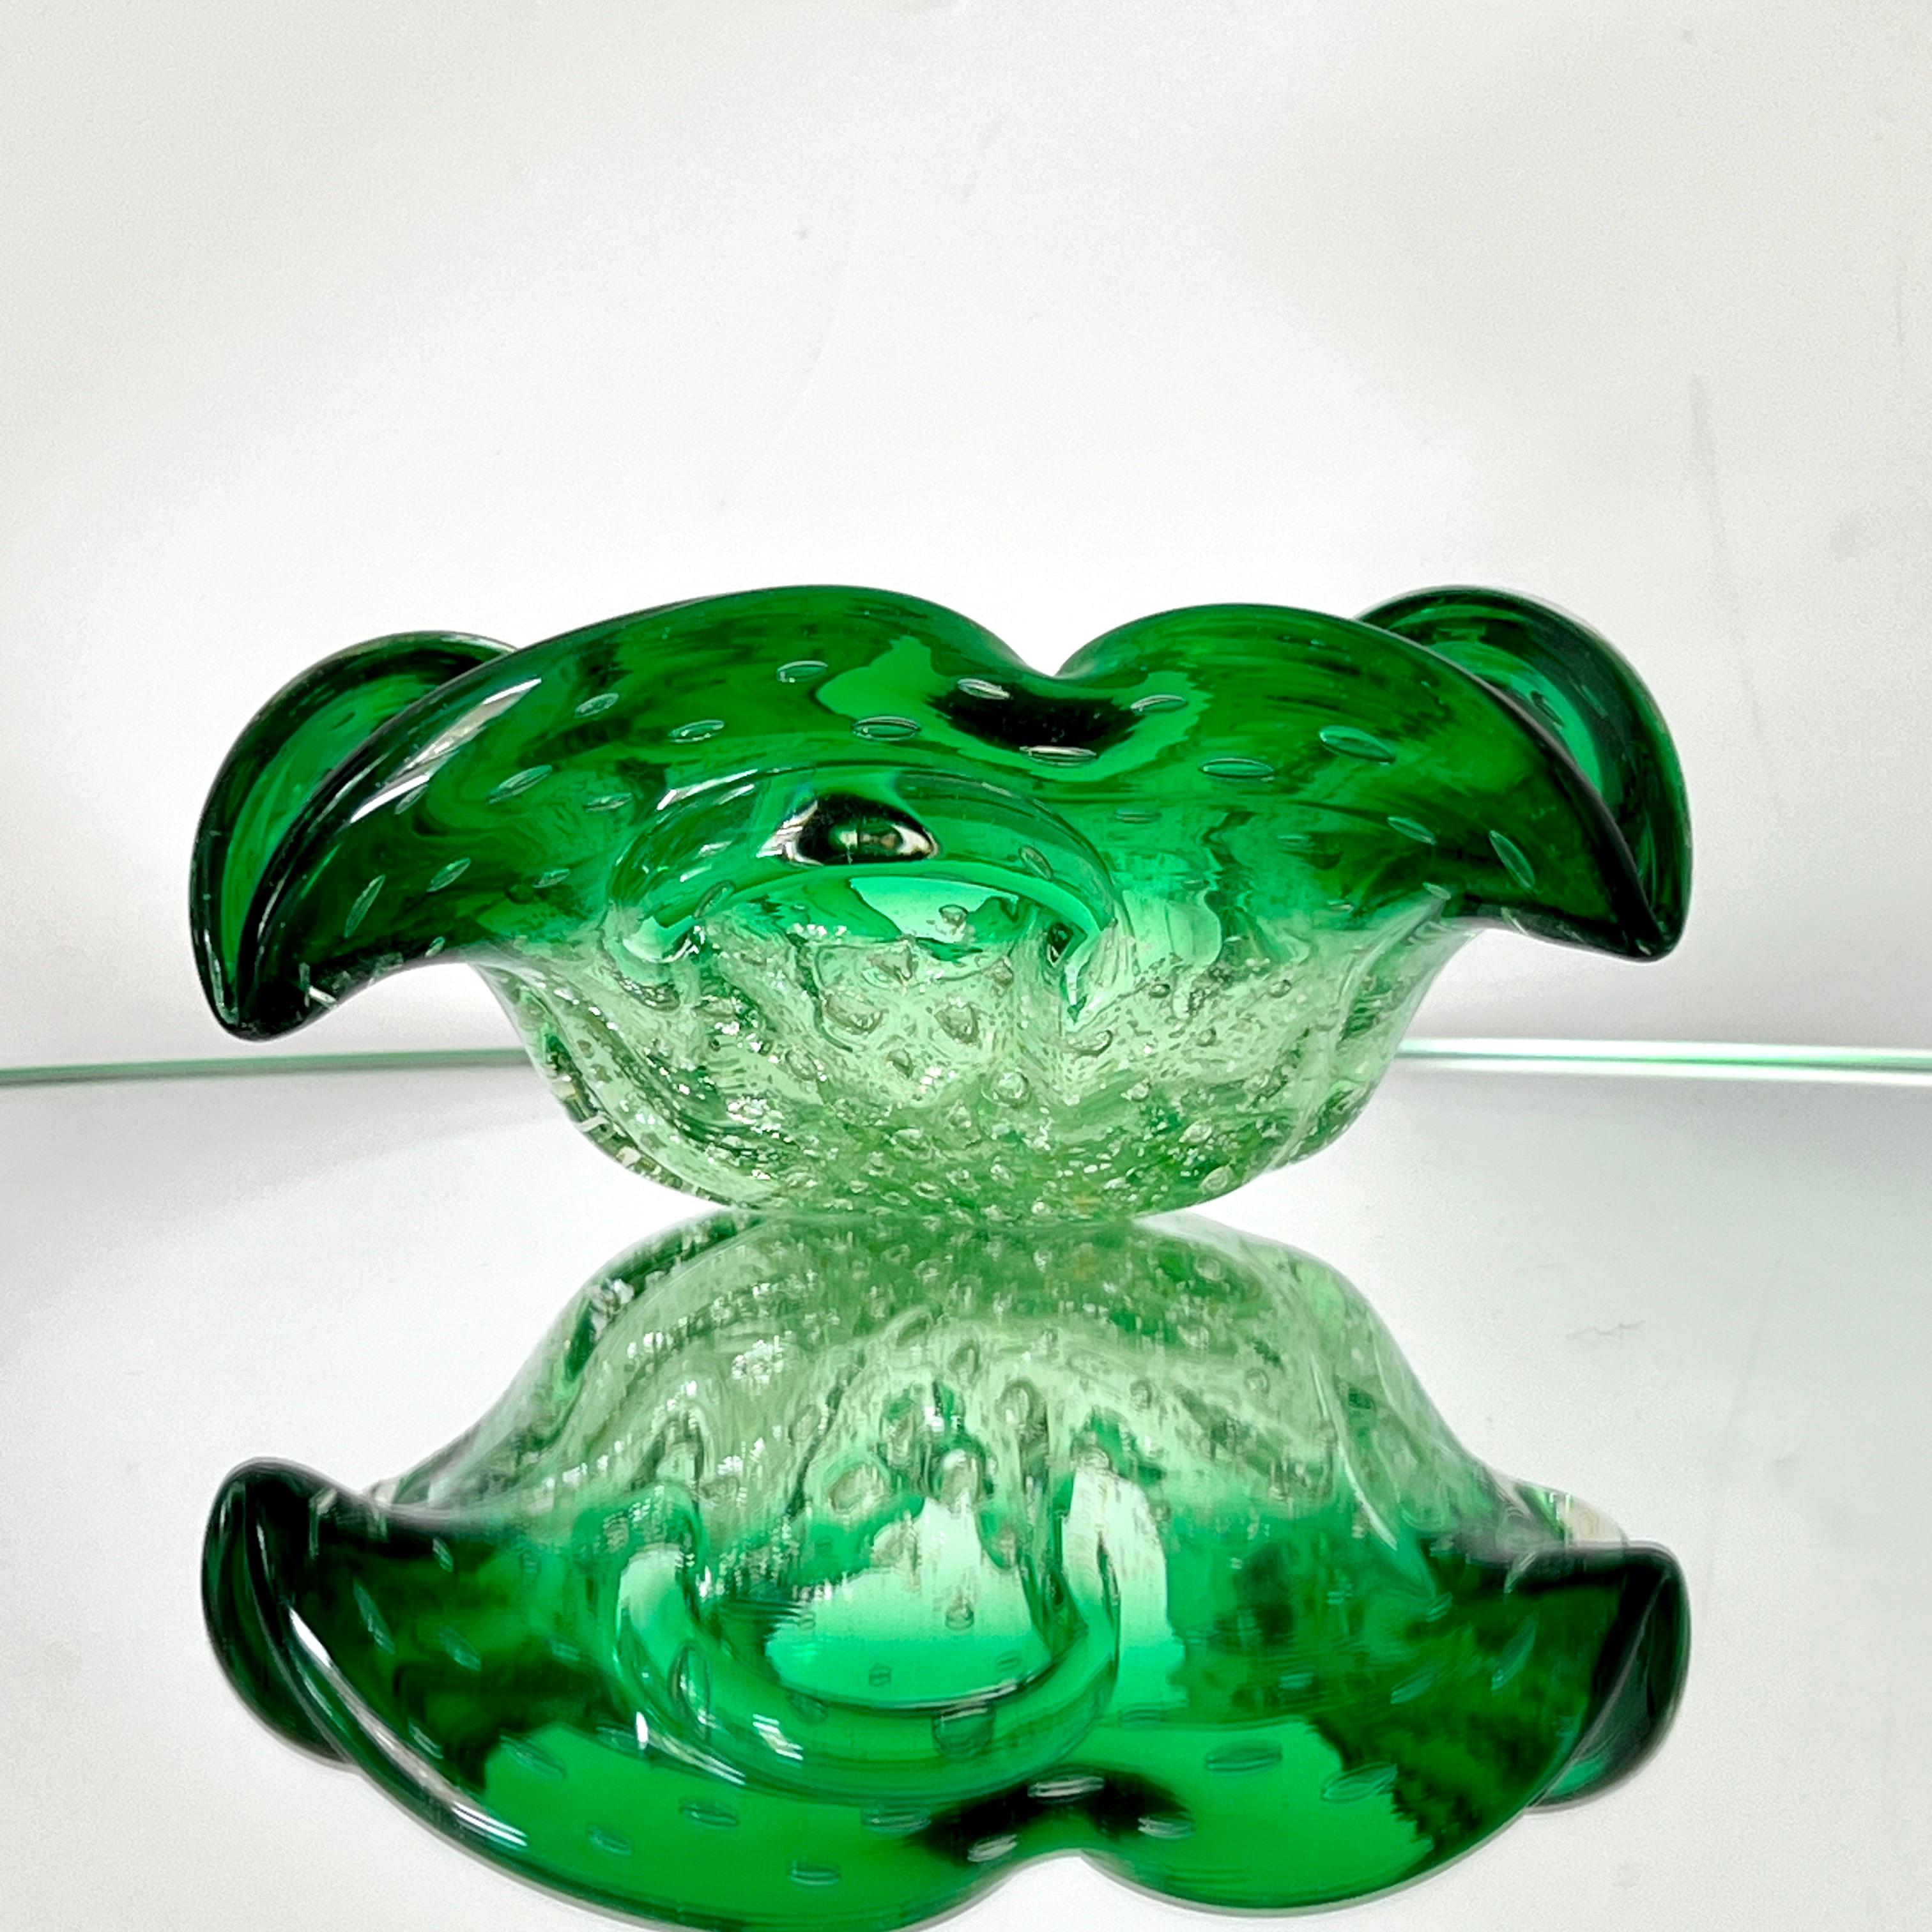 Mid-20th Century Green Murano Vide-Poche Bowl or Ashtray with Gold Leaf Accents, Italy, c. 1950 For Sale